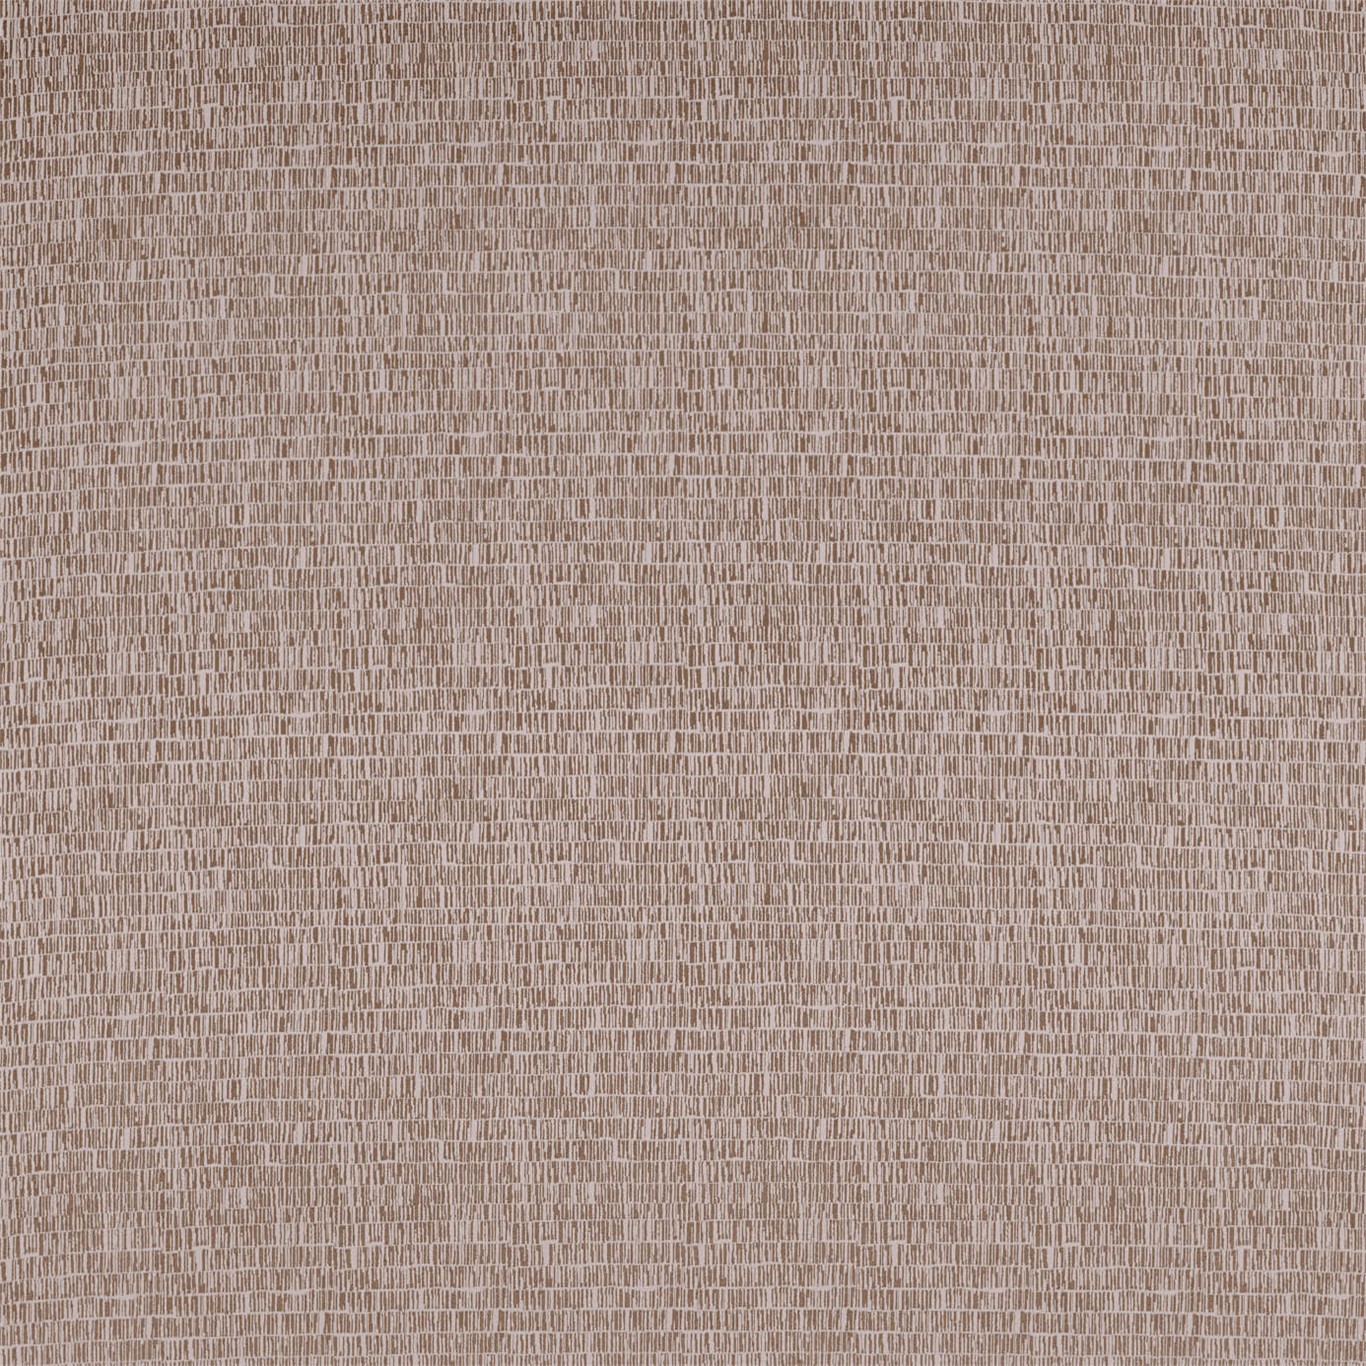 Skintilla Taupe Fabric by HAR